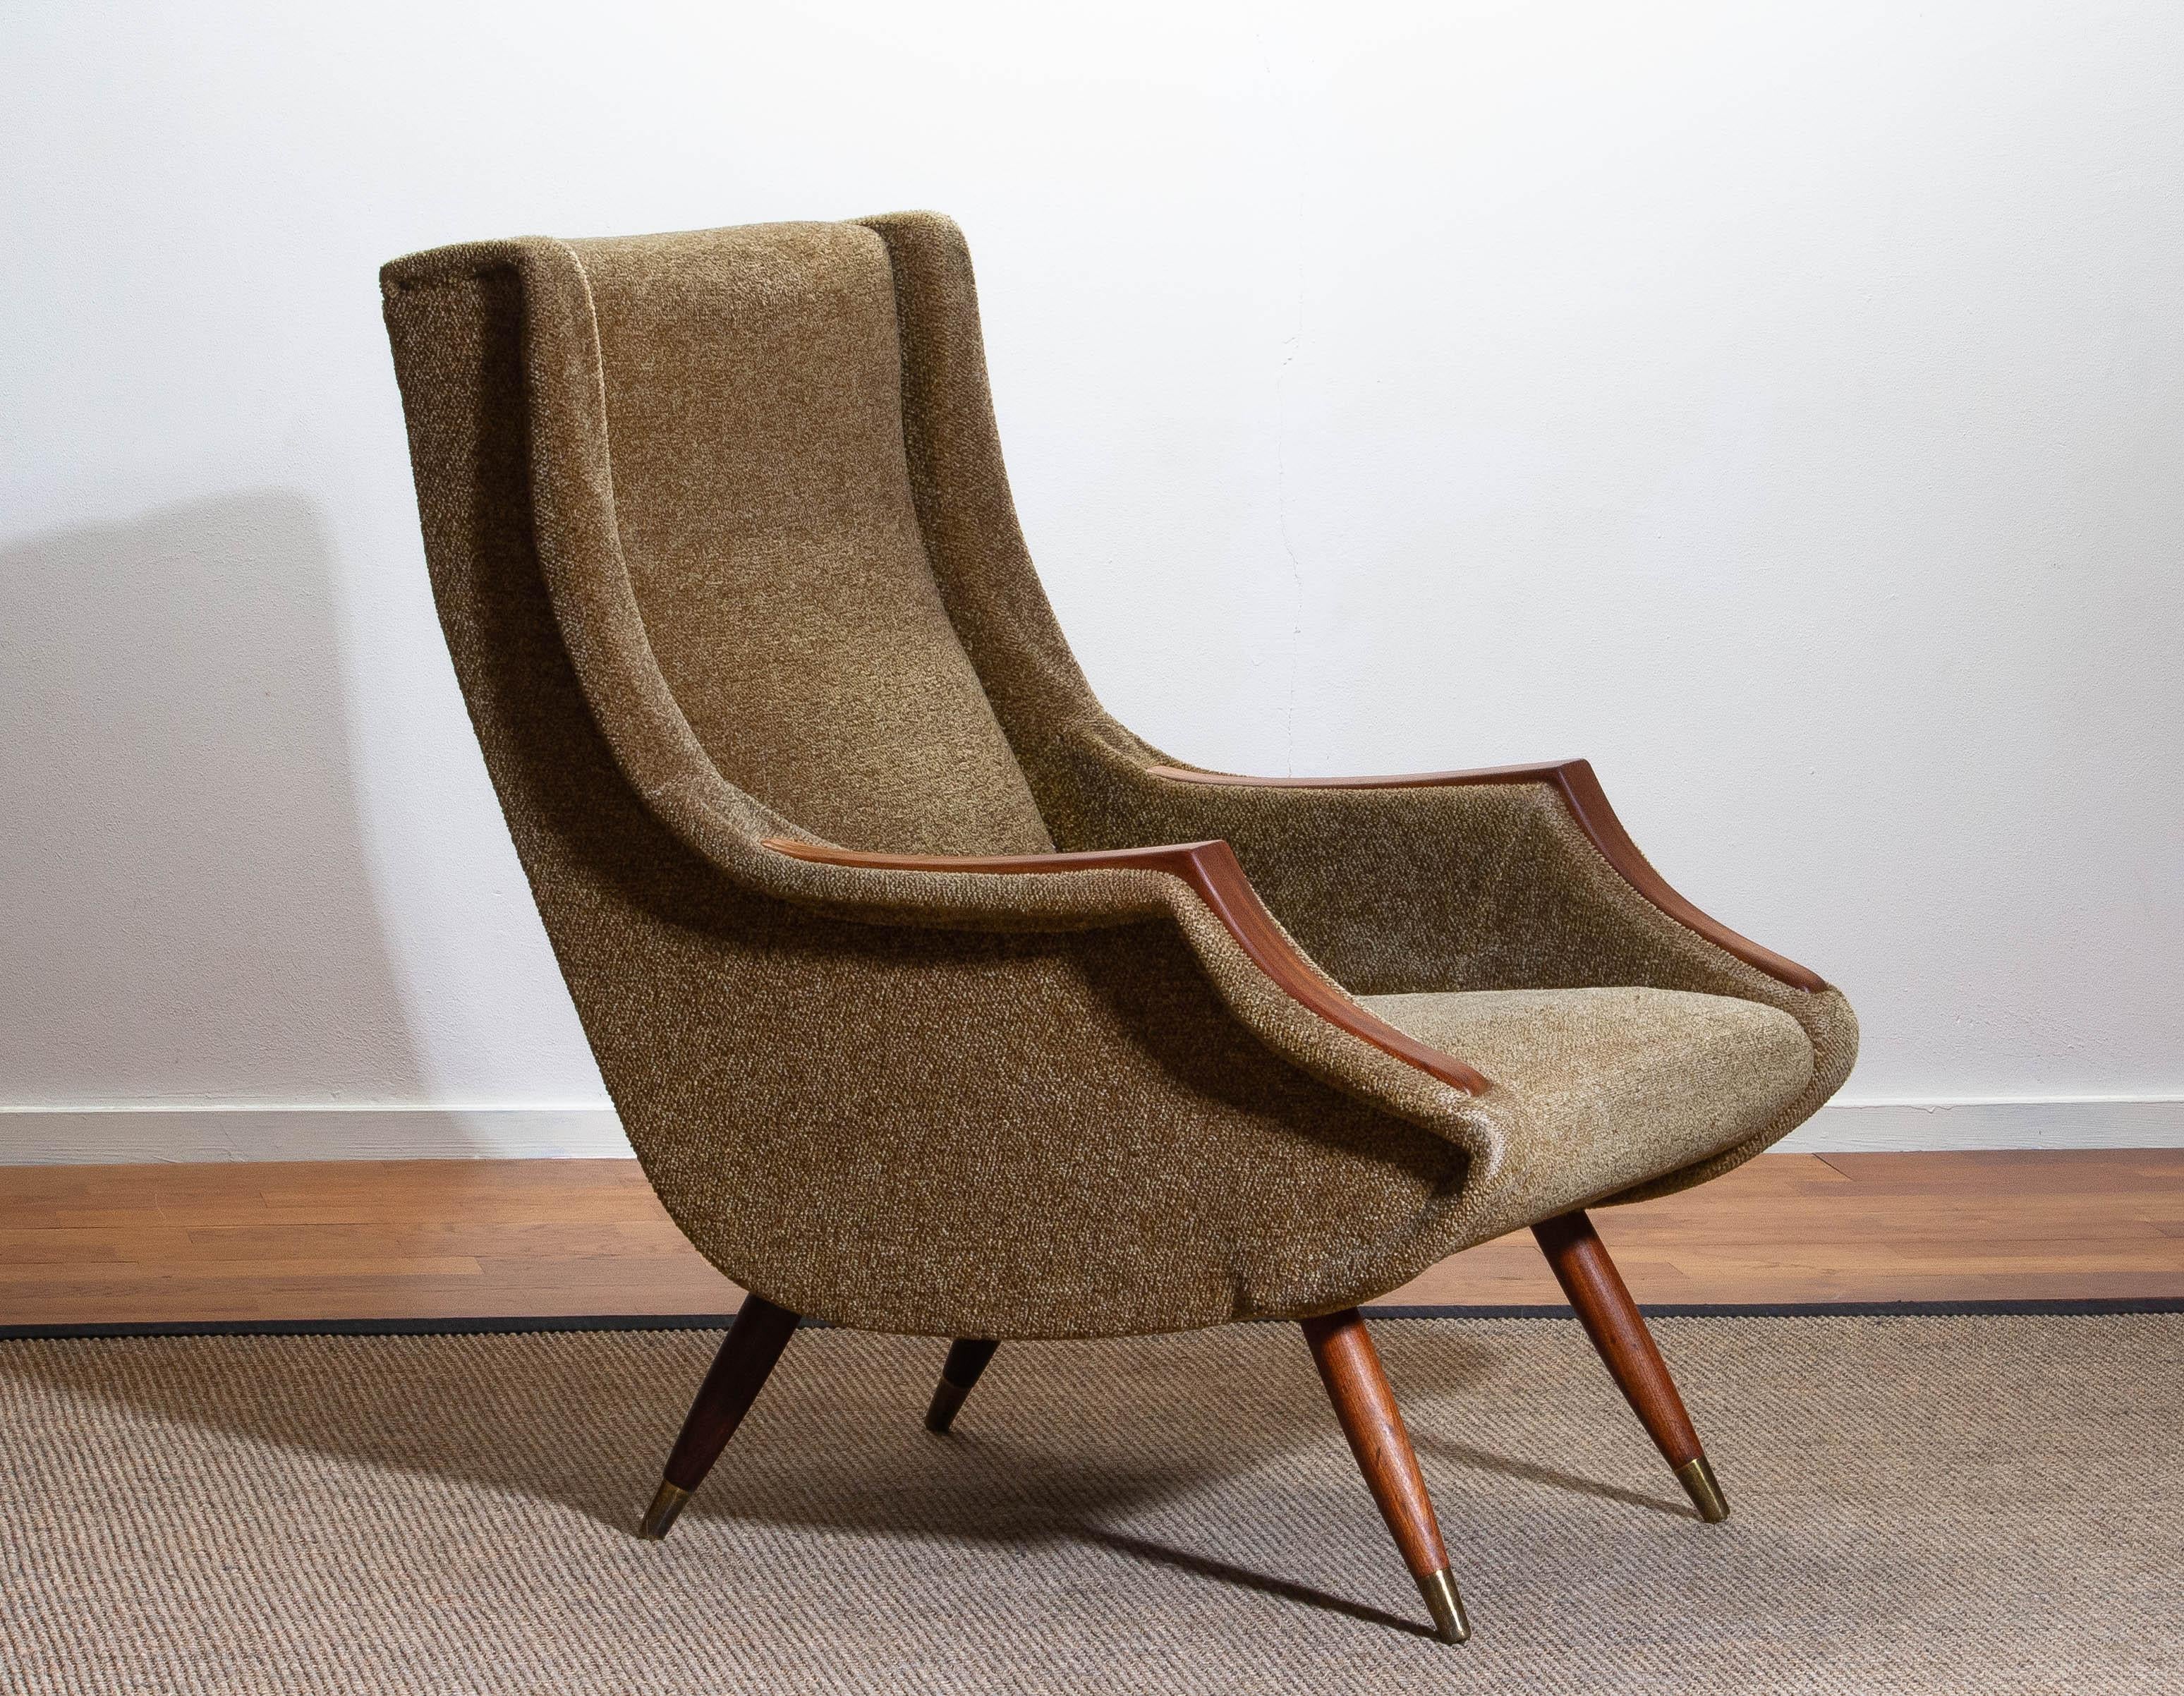 1950s, extremely rare easy chair designed by Aldo Morbelli for Isa Bergamo Italy still in original condition.
Armrests and legs in teak.
Overall impression for the age is good.
   